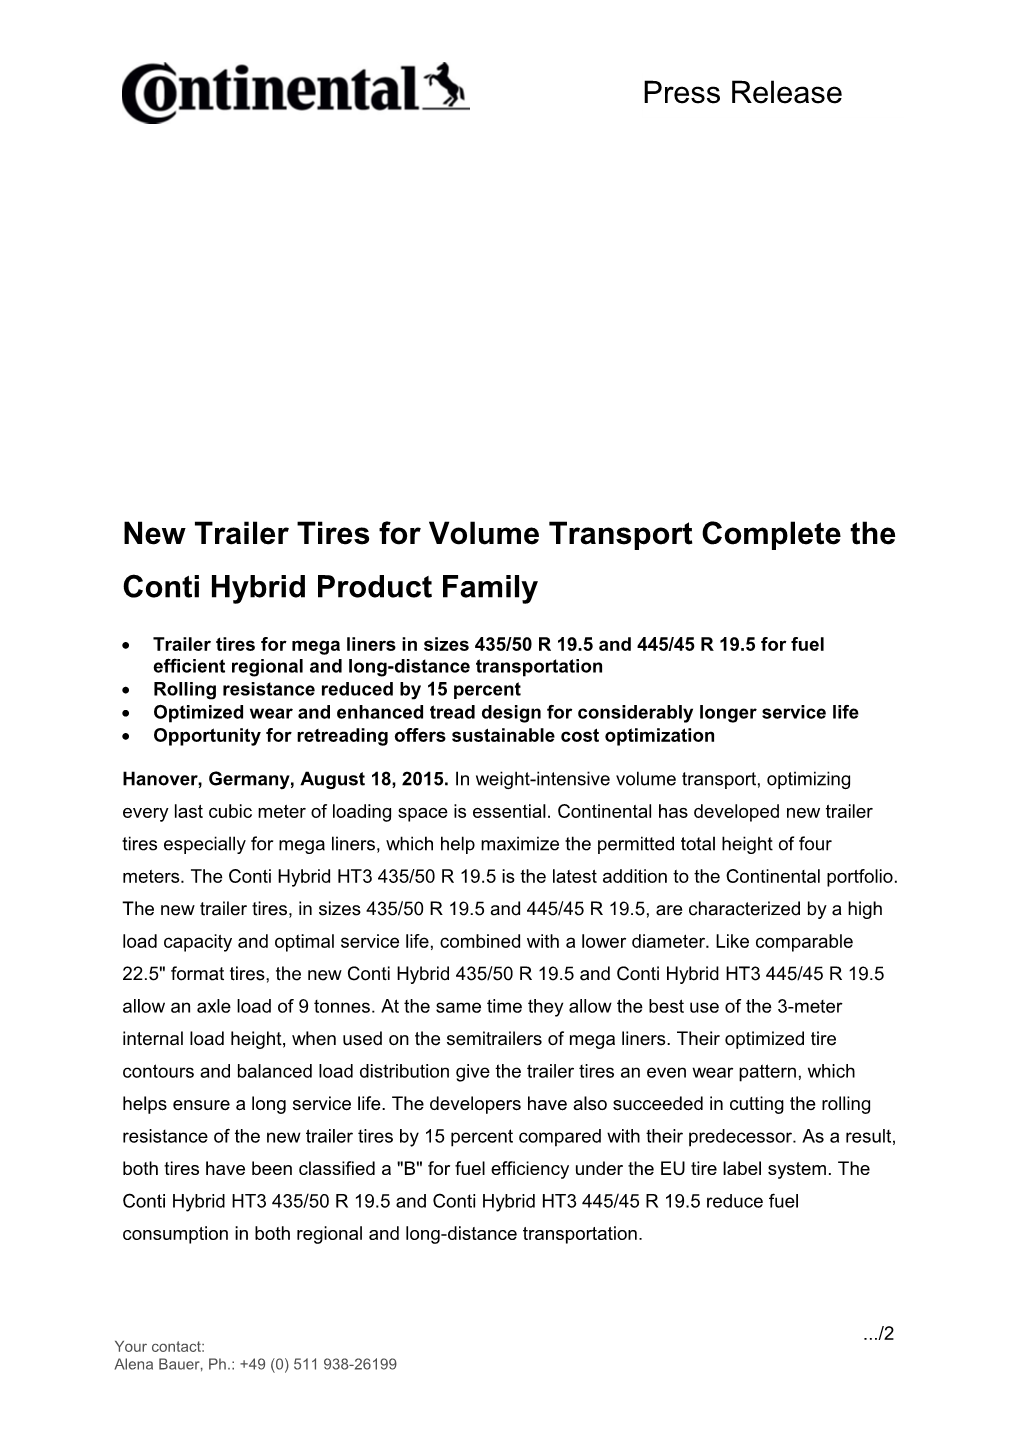 New Trailer Tires for Volume Transport Complete the Conti Hybrid Product Family